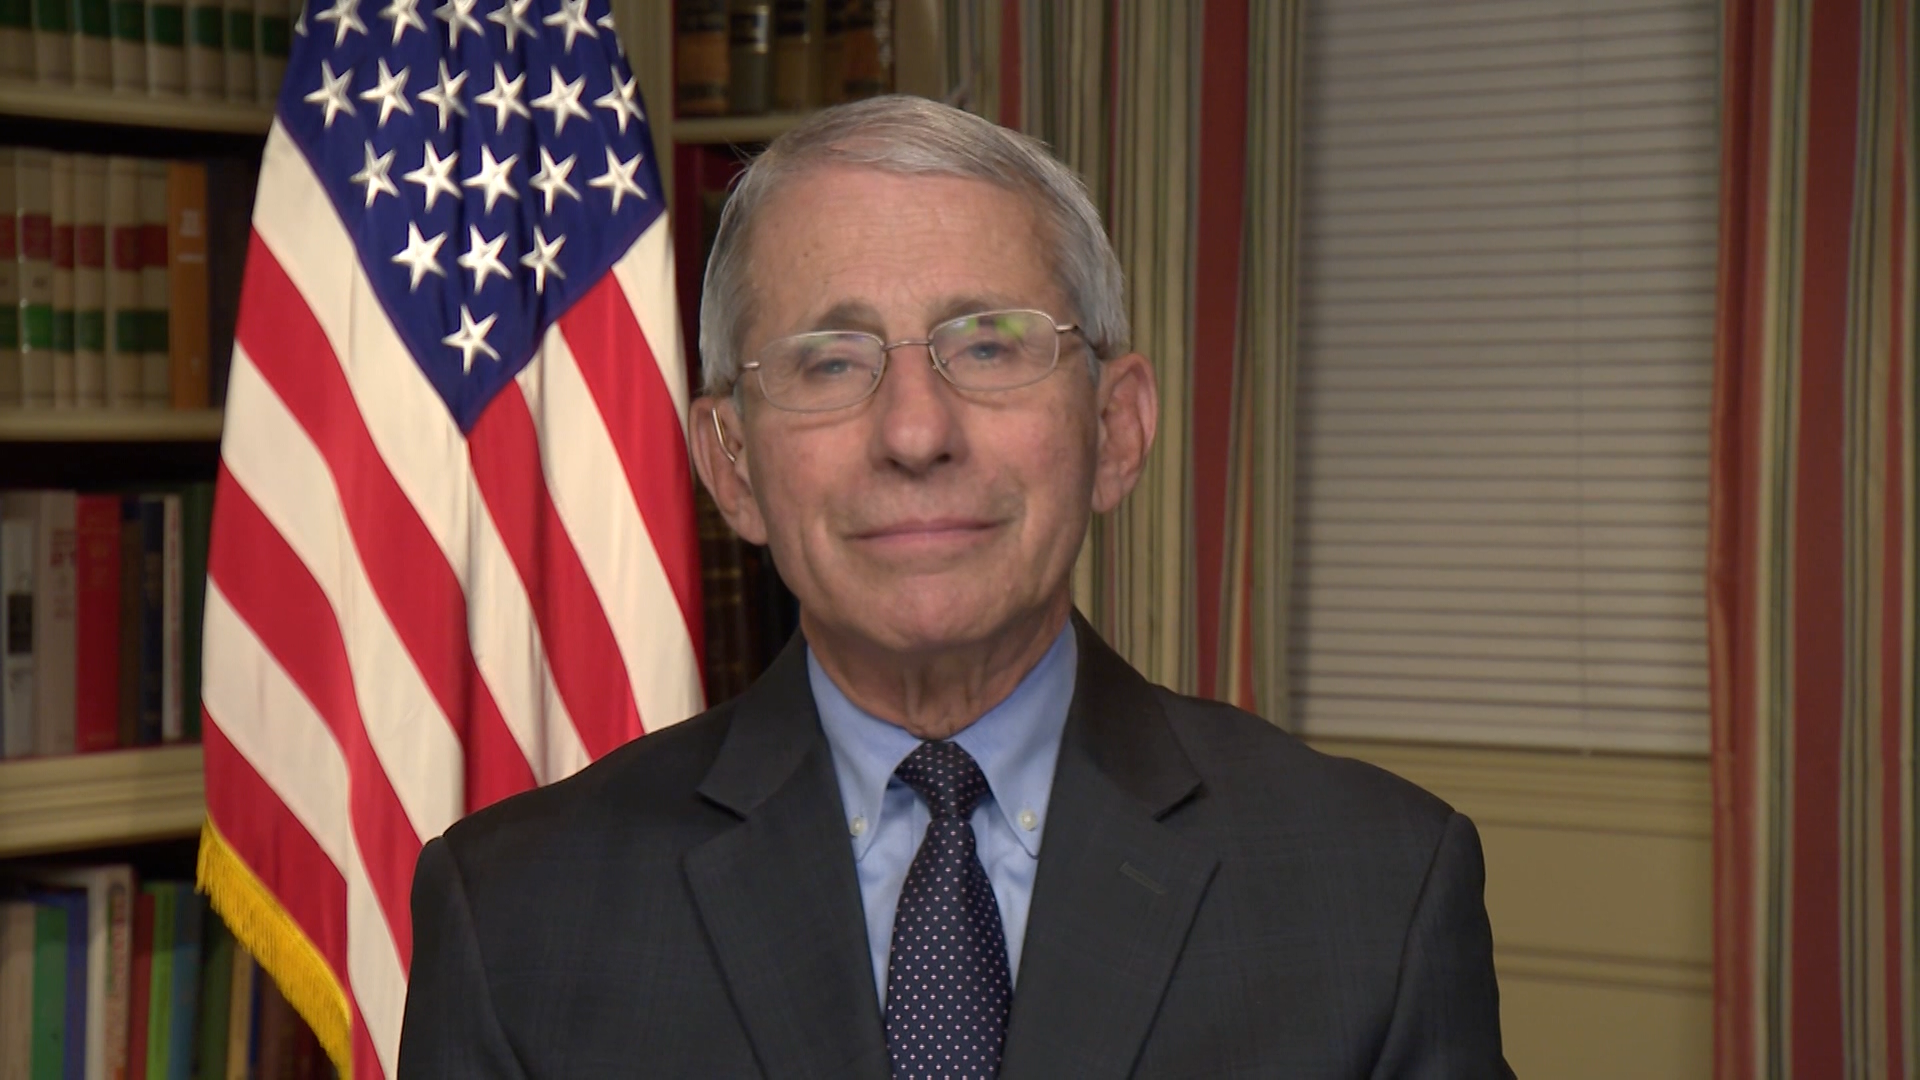 In an exclusive interview Friday with WCNC Charlotte, Dr. Anthony Fauci, is cautiously optimistic the RNC will happen in Charlotte this summer.